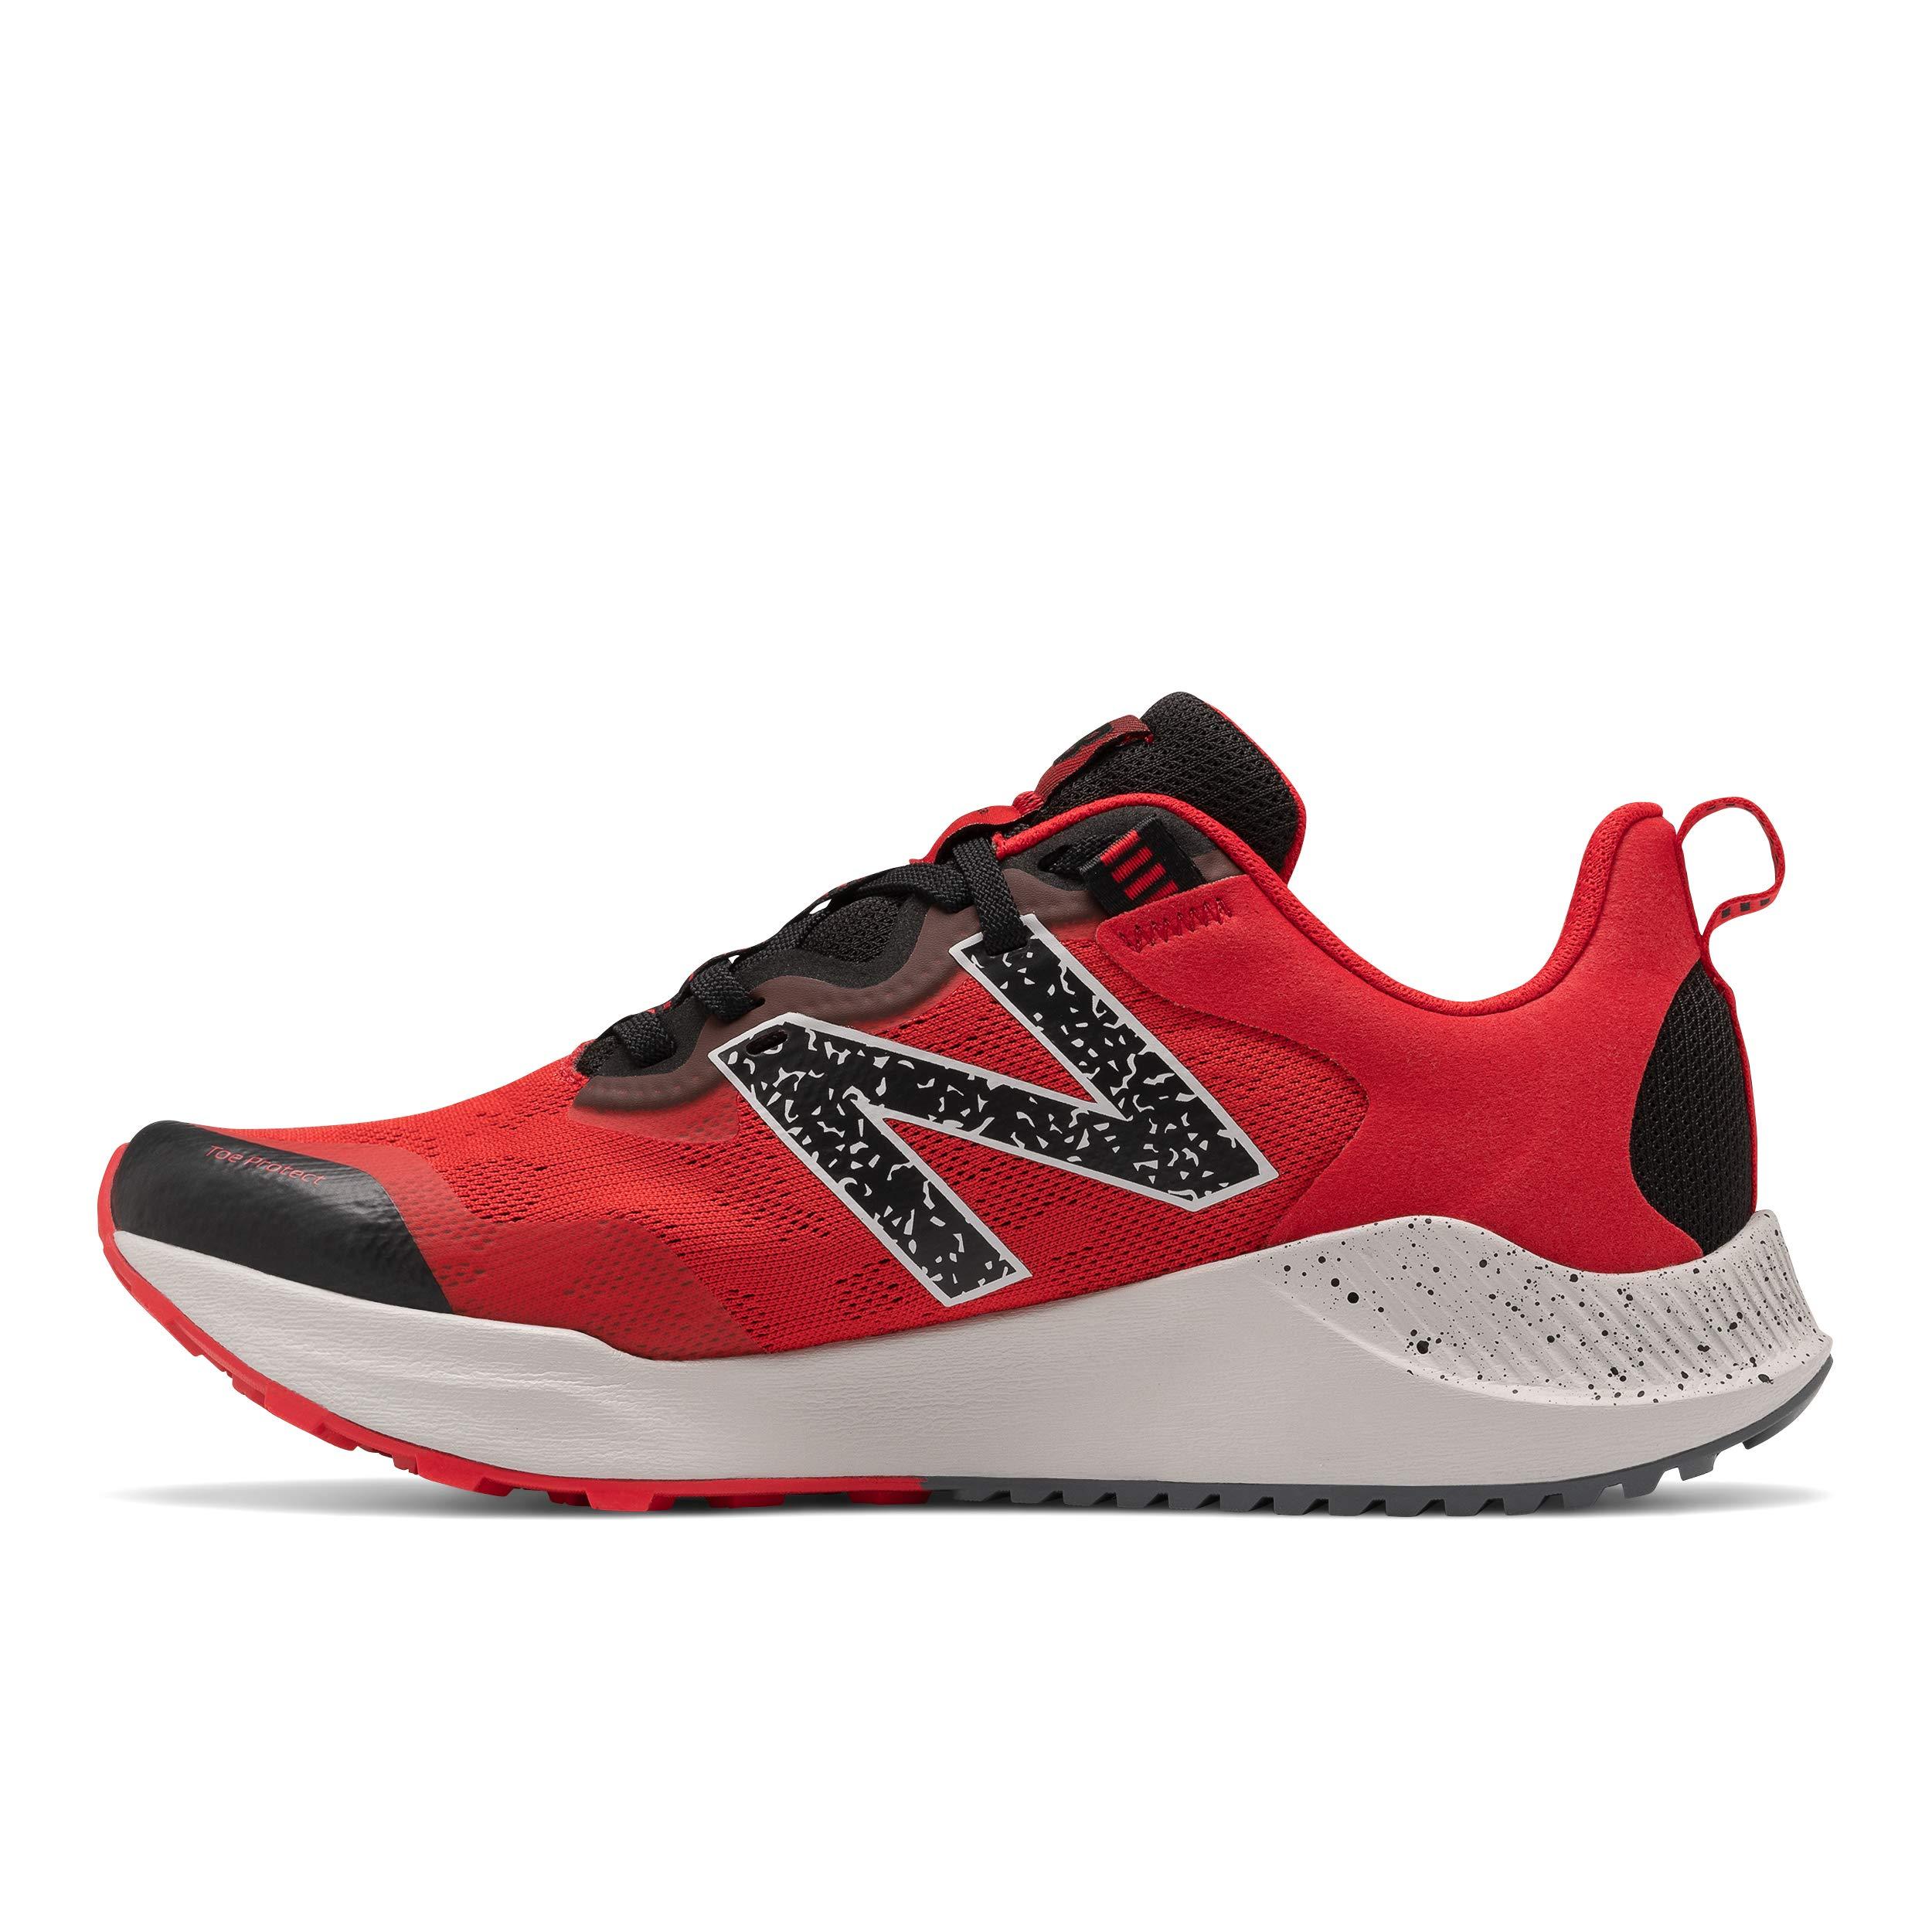 New Balance Synthetic Nitrel V4 Trail Running Shoe in Red/Black (Red ...